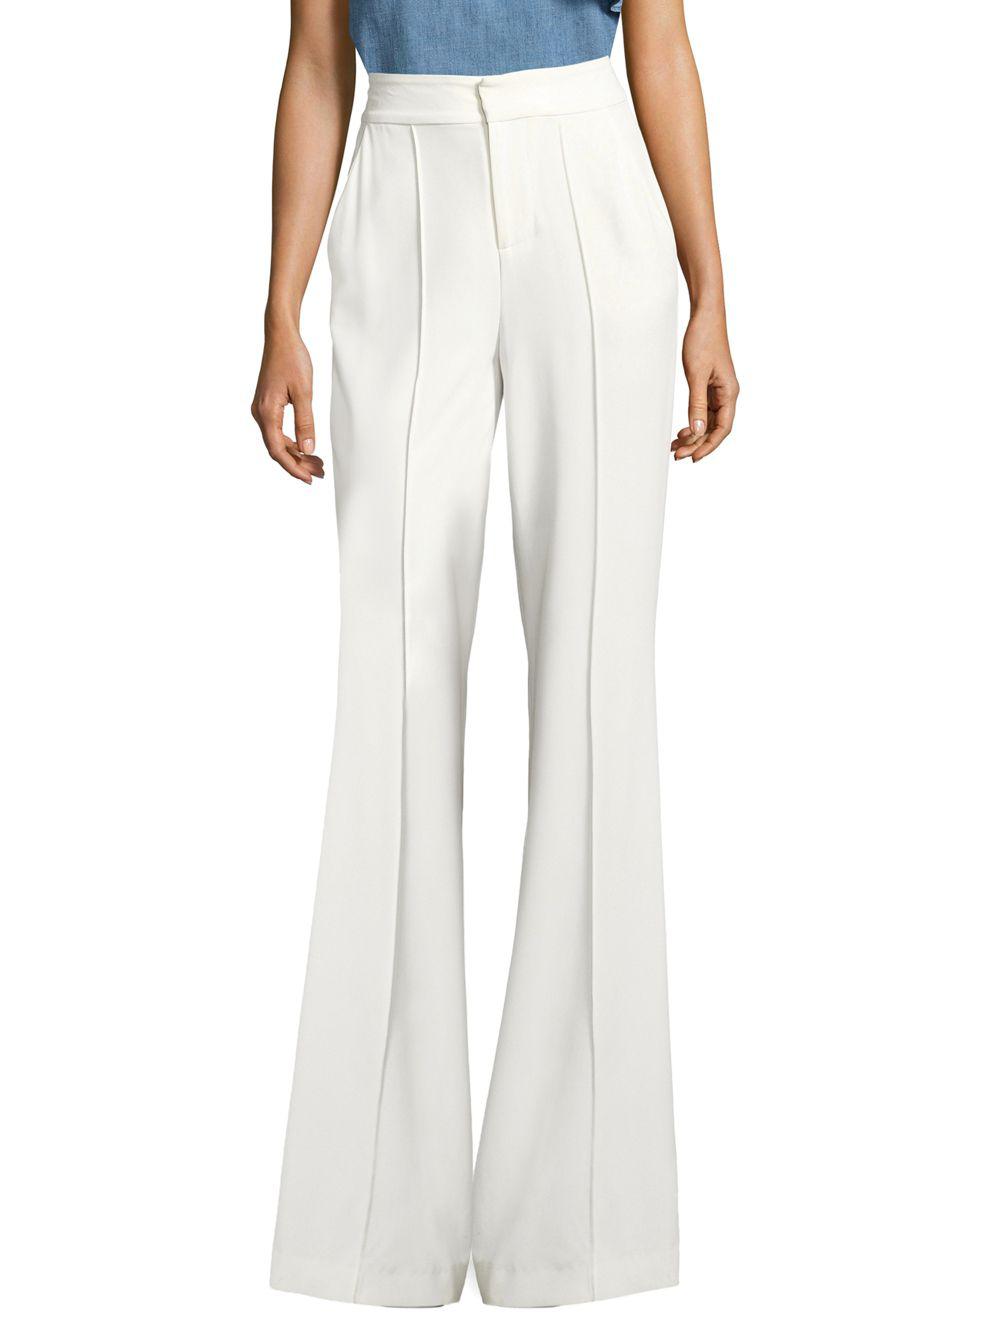 Alice + Olivia Dylan High-waist Wide-leg Pants in White | Lyst